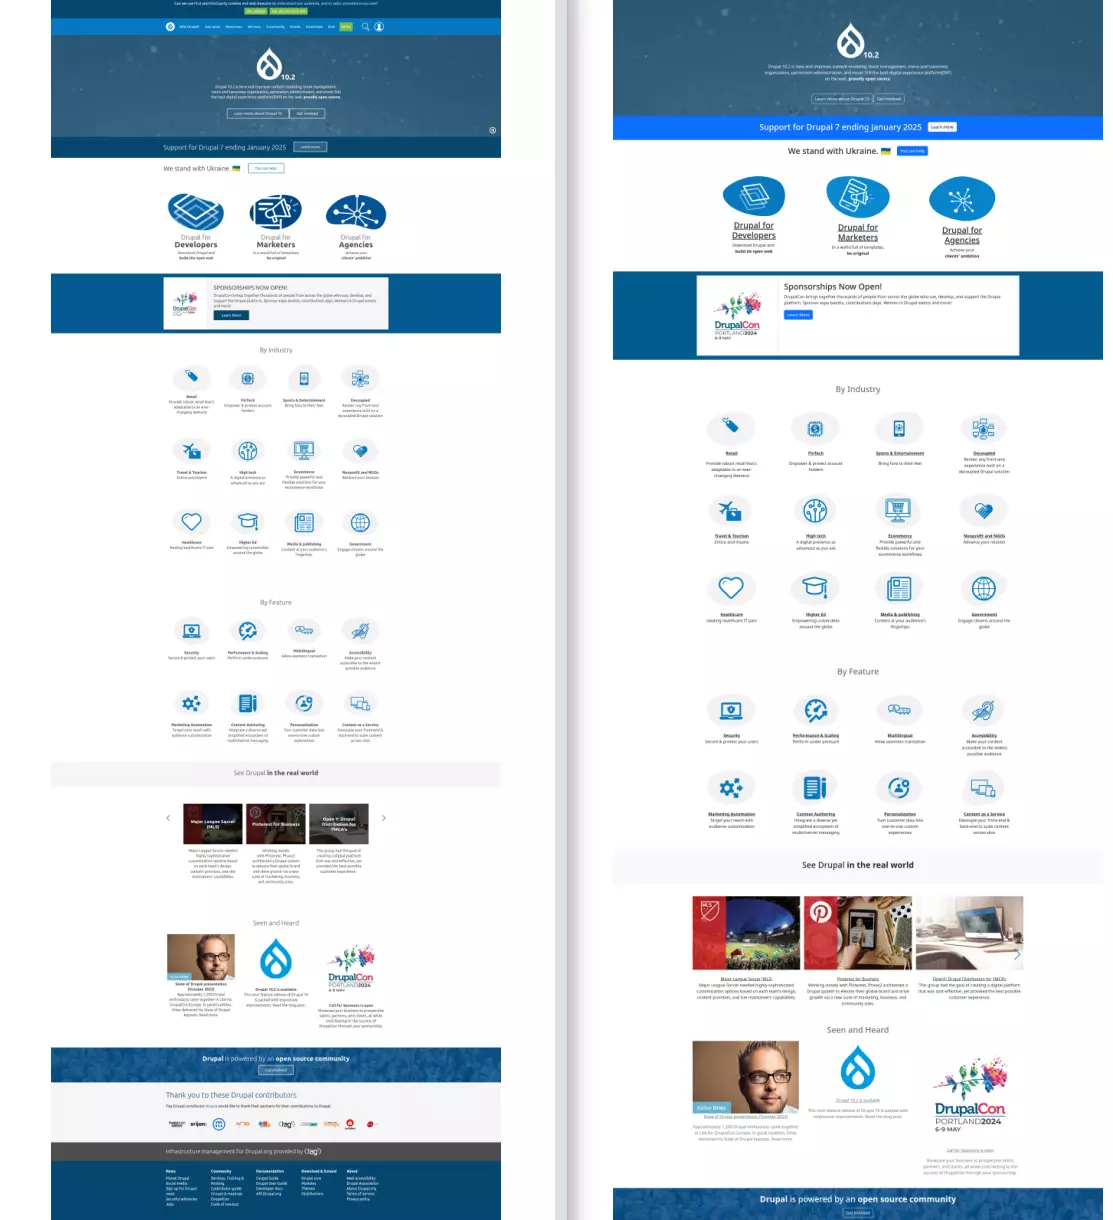 Comparsion of Drupal.org home page and the home page created using the VLSuite module